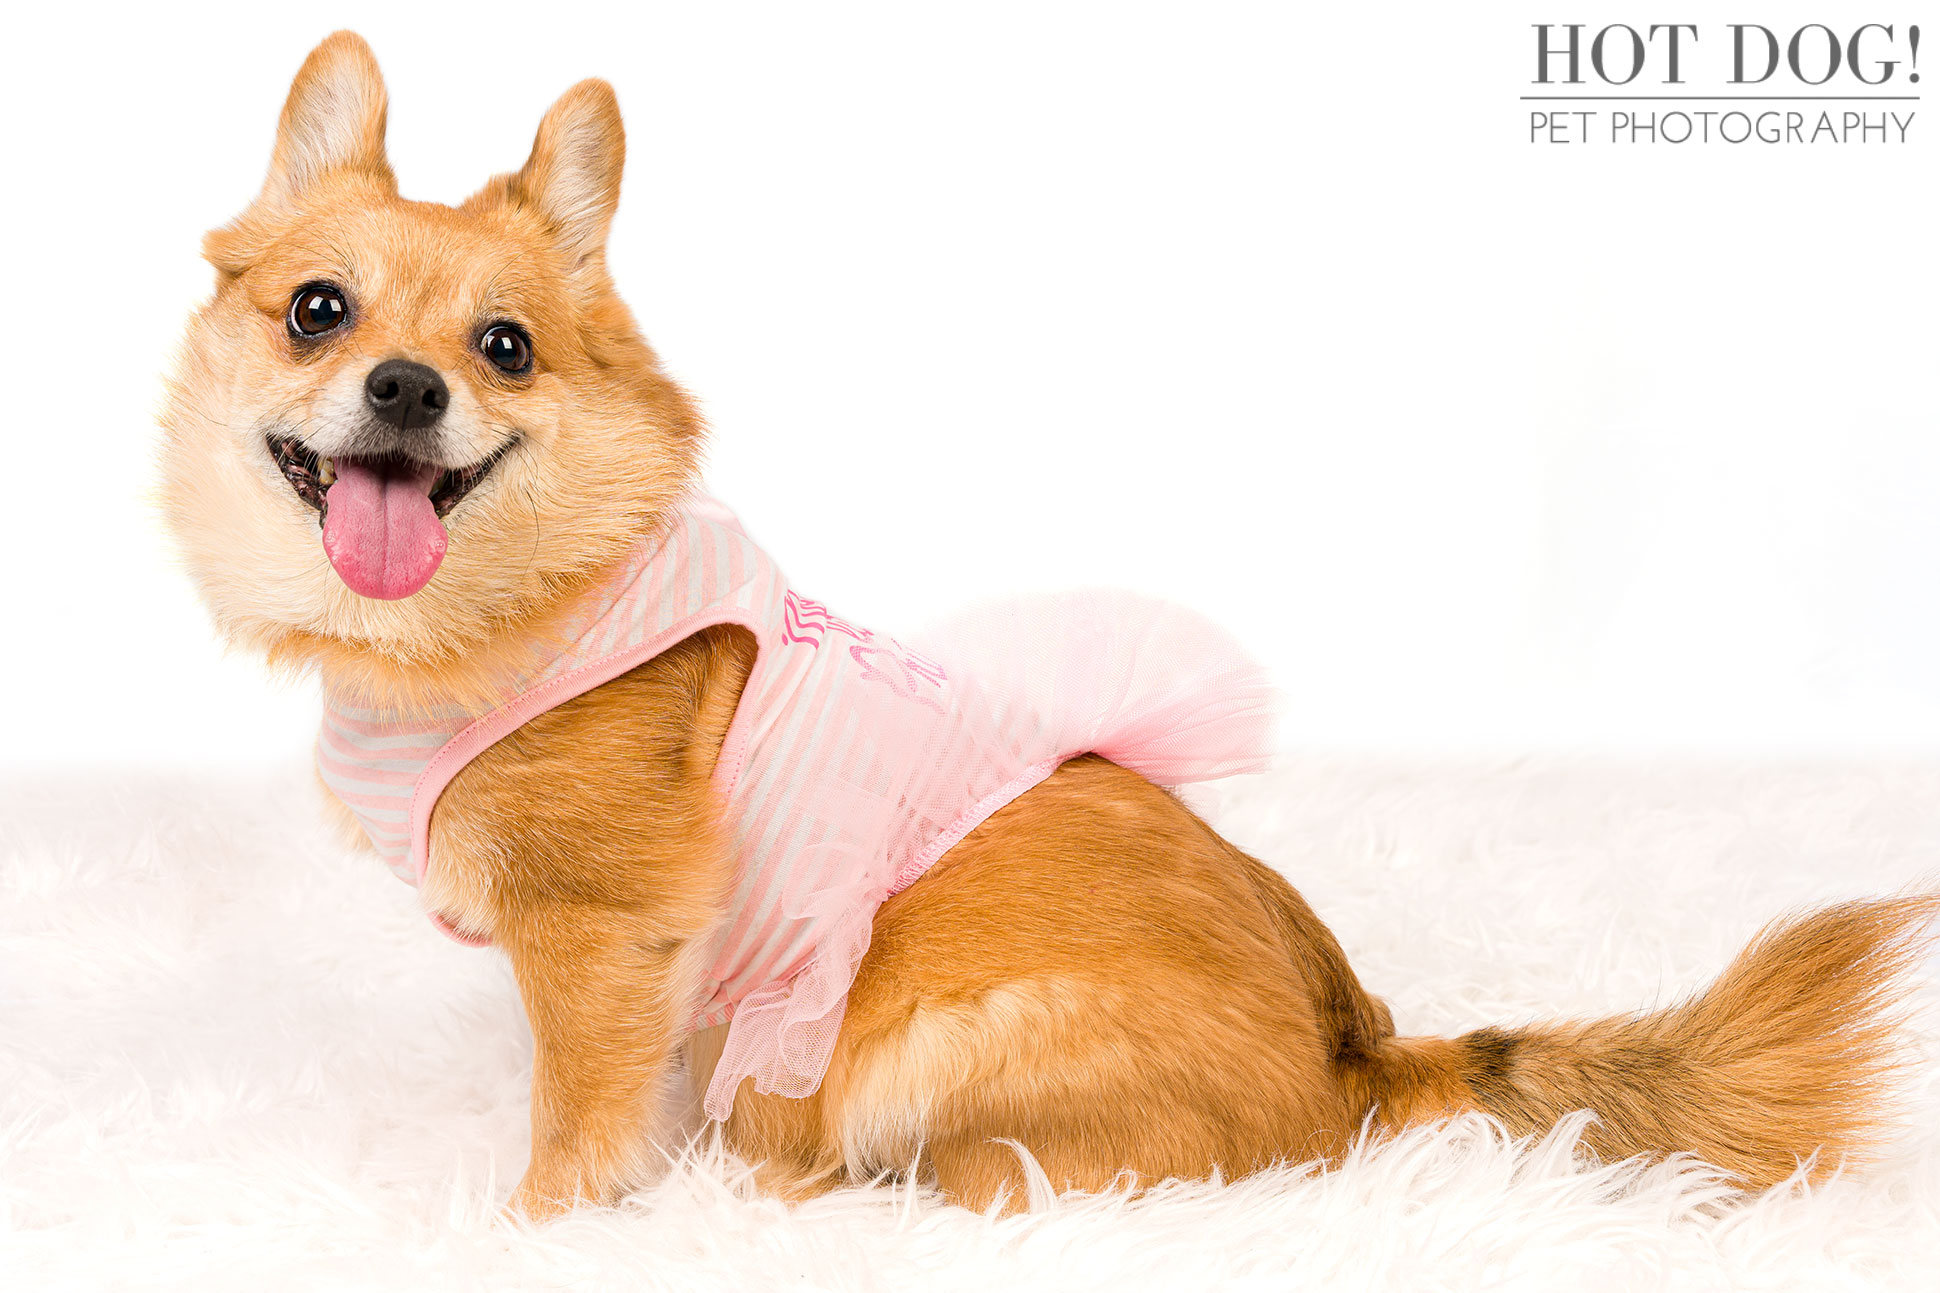 Pet photographer Hot Dog! Pet Photography captures the adorable personality of Toy Pomeranian Corgi mix Tinkerbelle in this professional photo session.